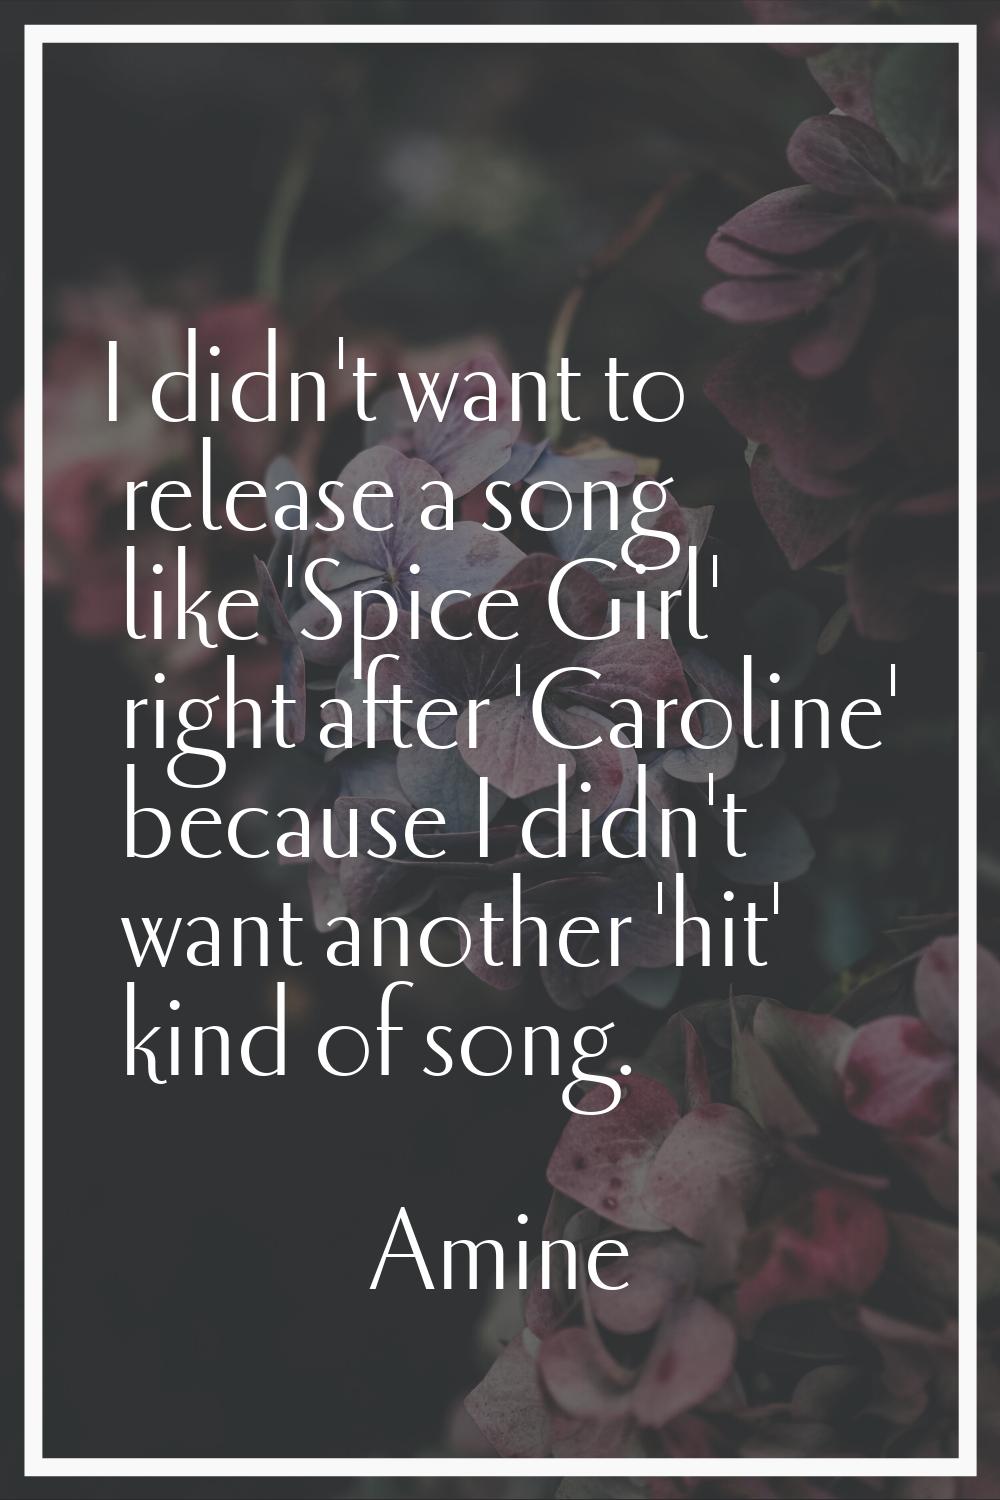 I didn't want to release a song like 'Spice Girl' right after 'Caroline' because I didn't want anot